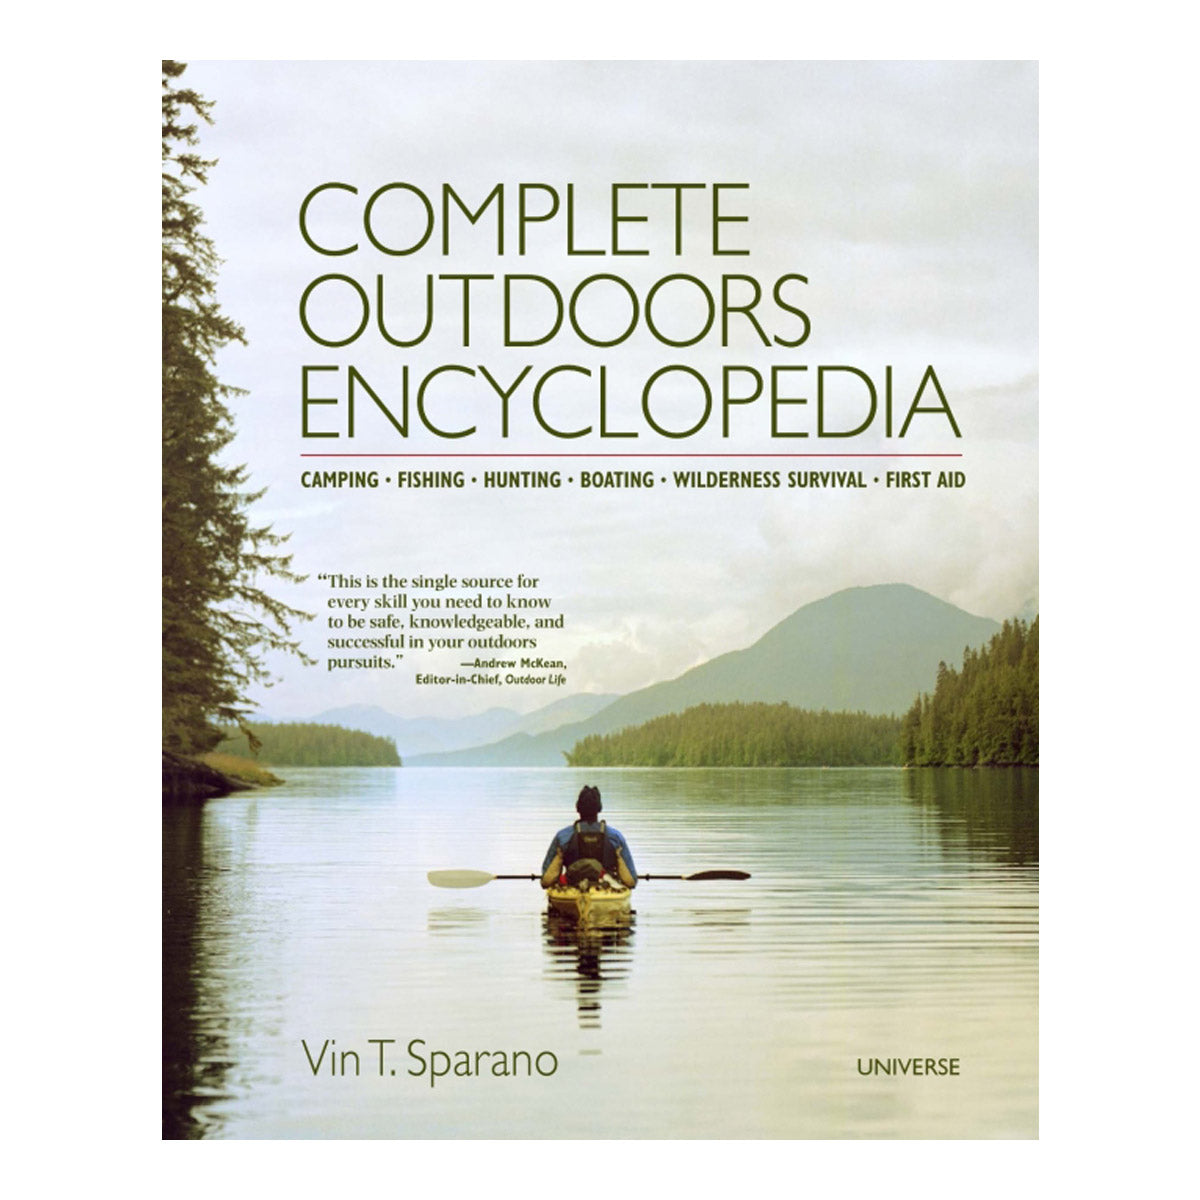 Complete Outdoor Encyclopedia by Vin T. Sparano